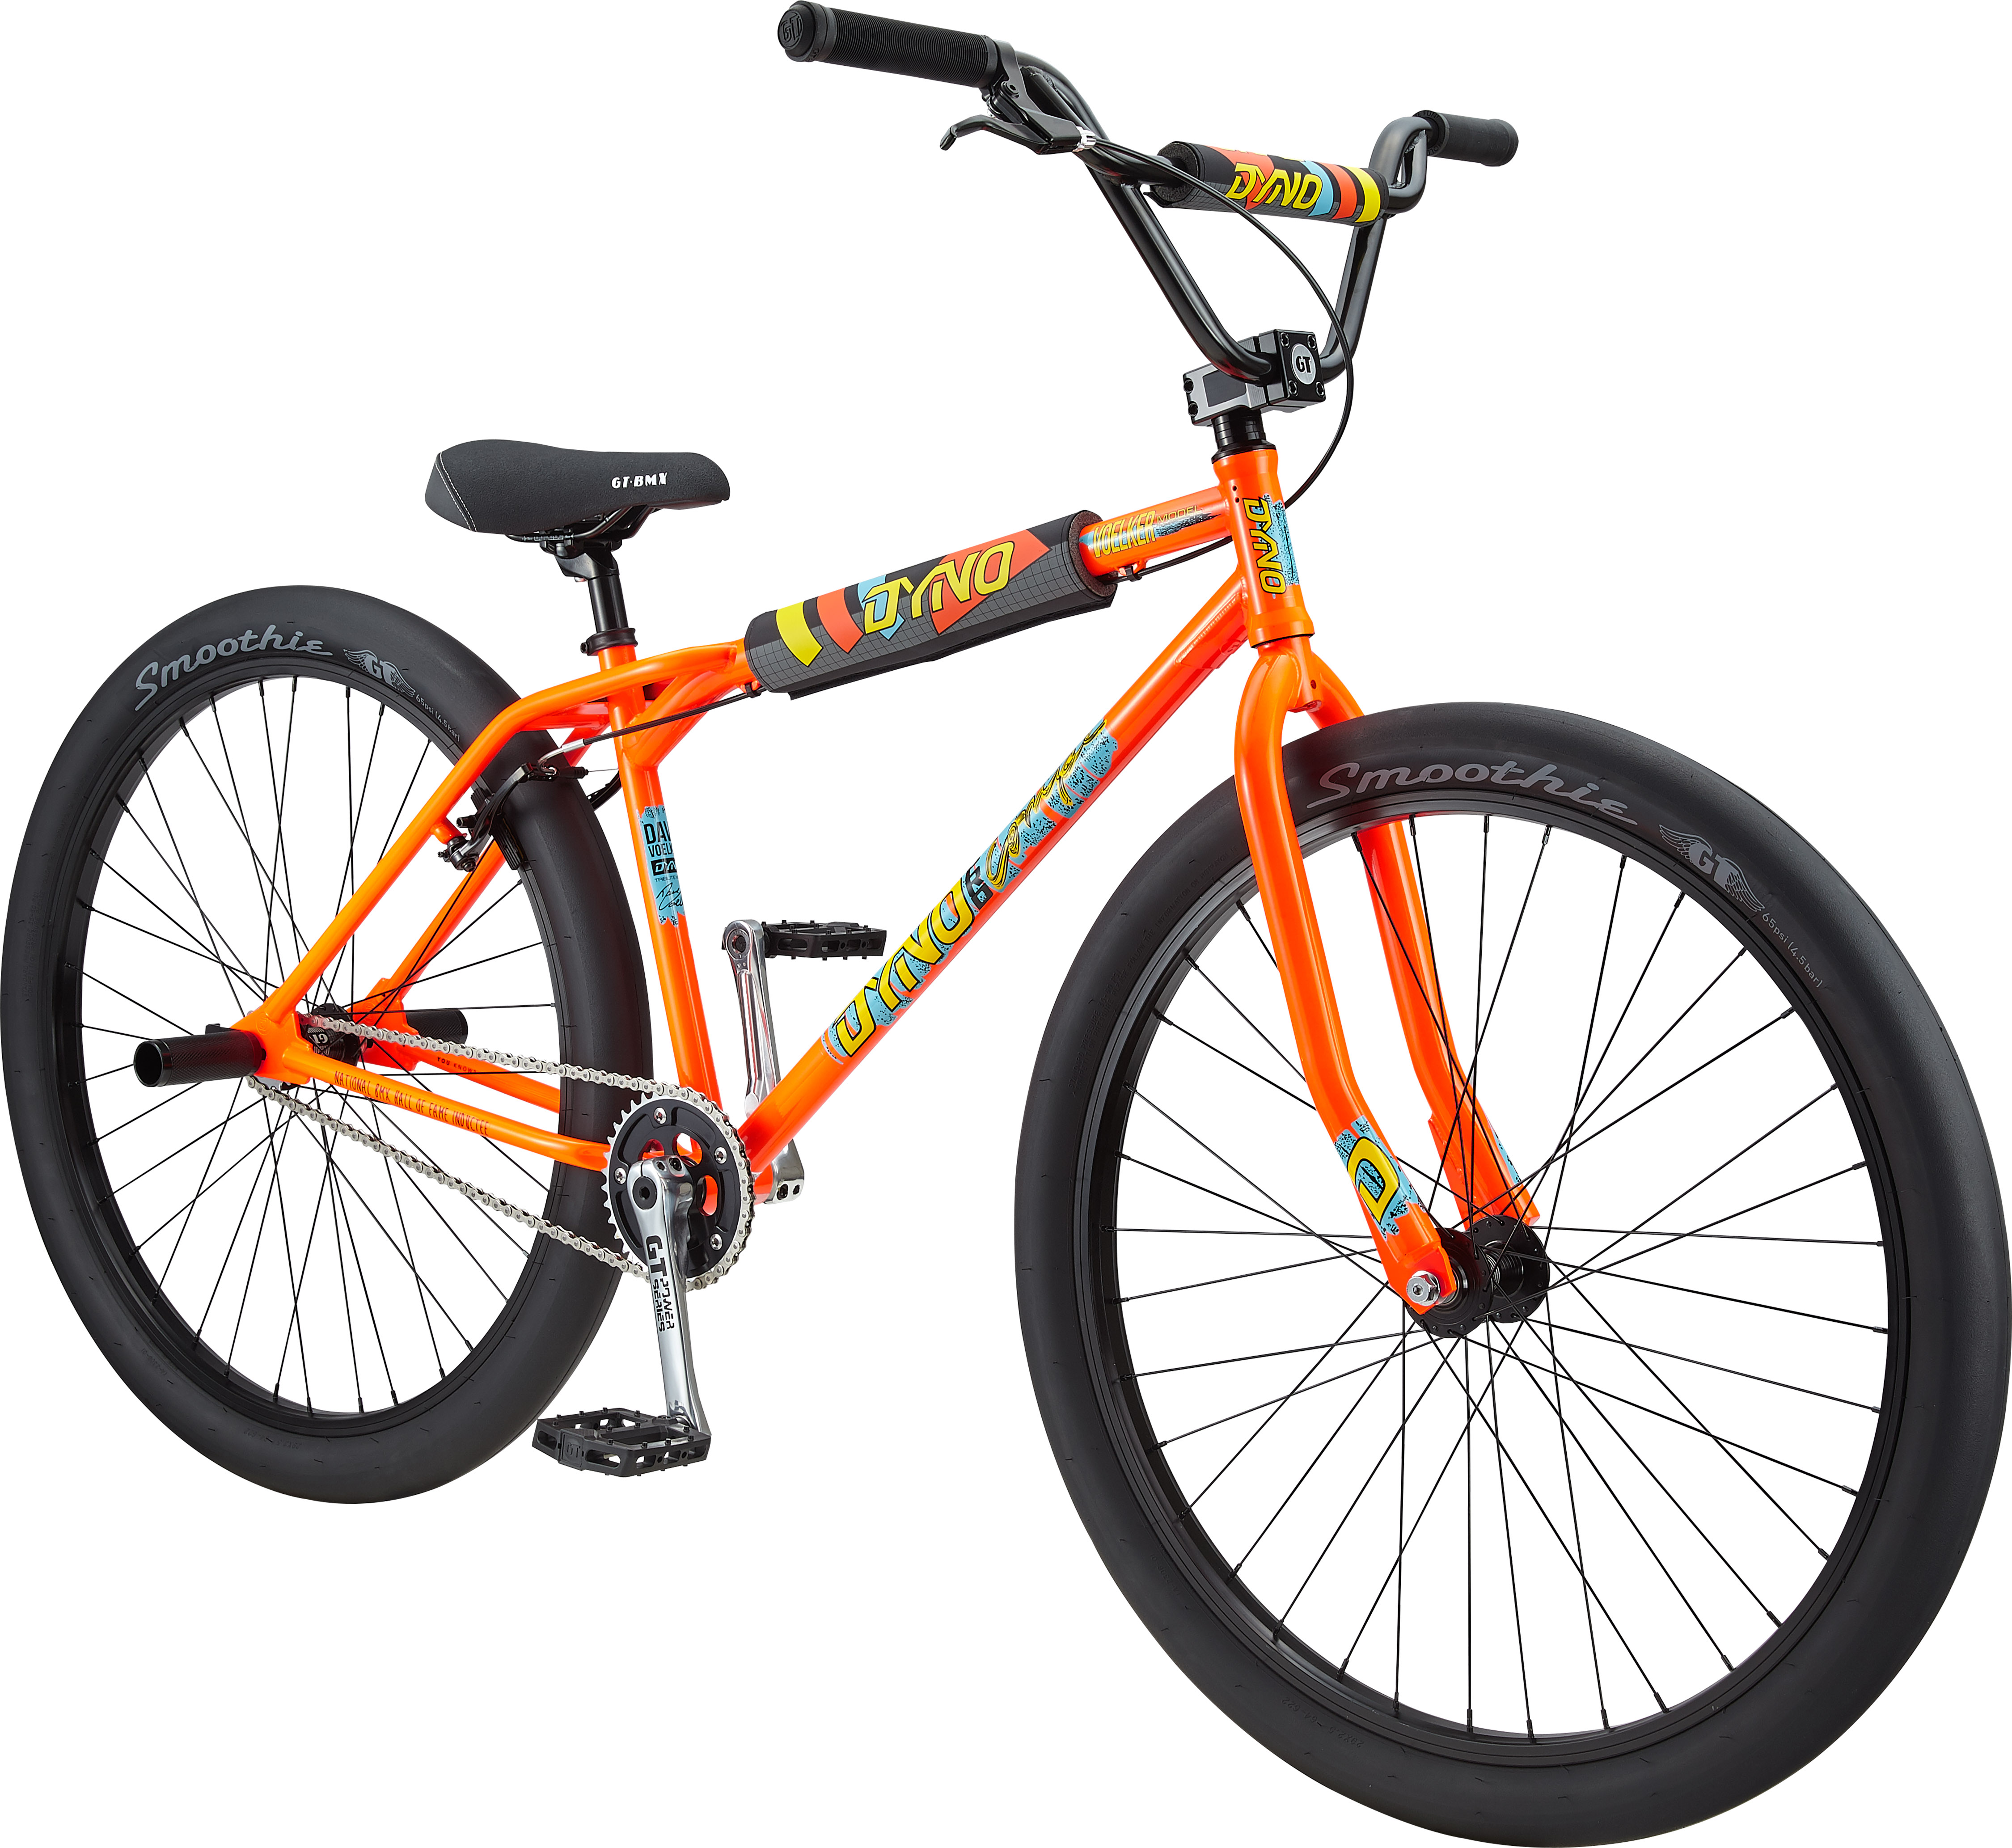 Dyno Pro Compe BMX returns as Special Edition GT Heritage model with 29" wheels